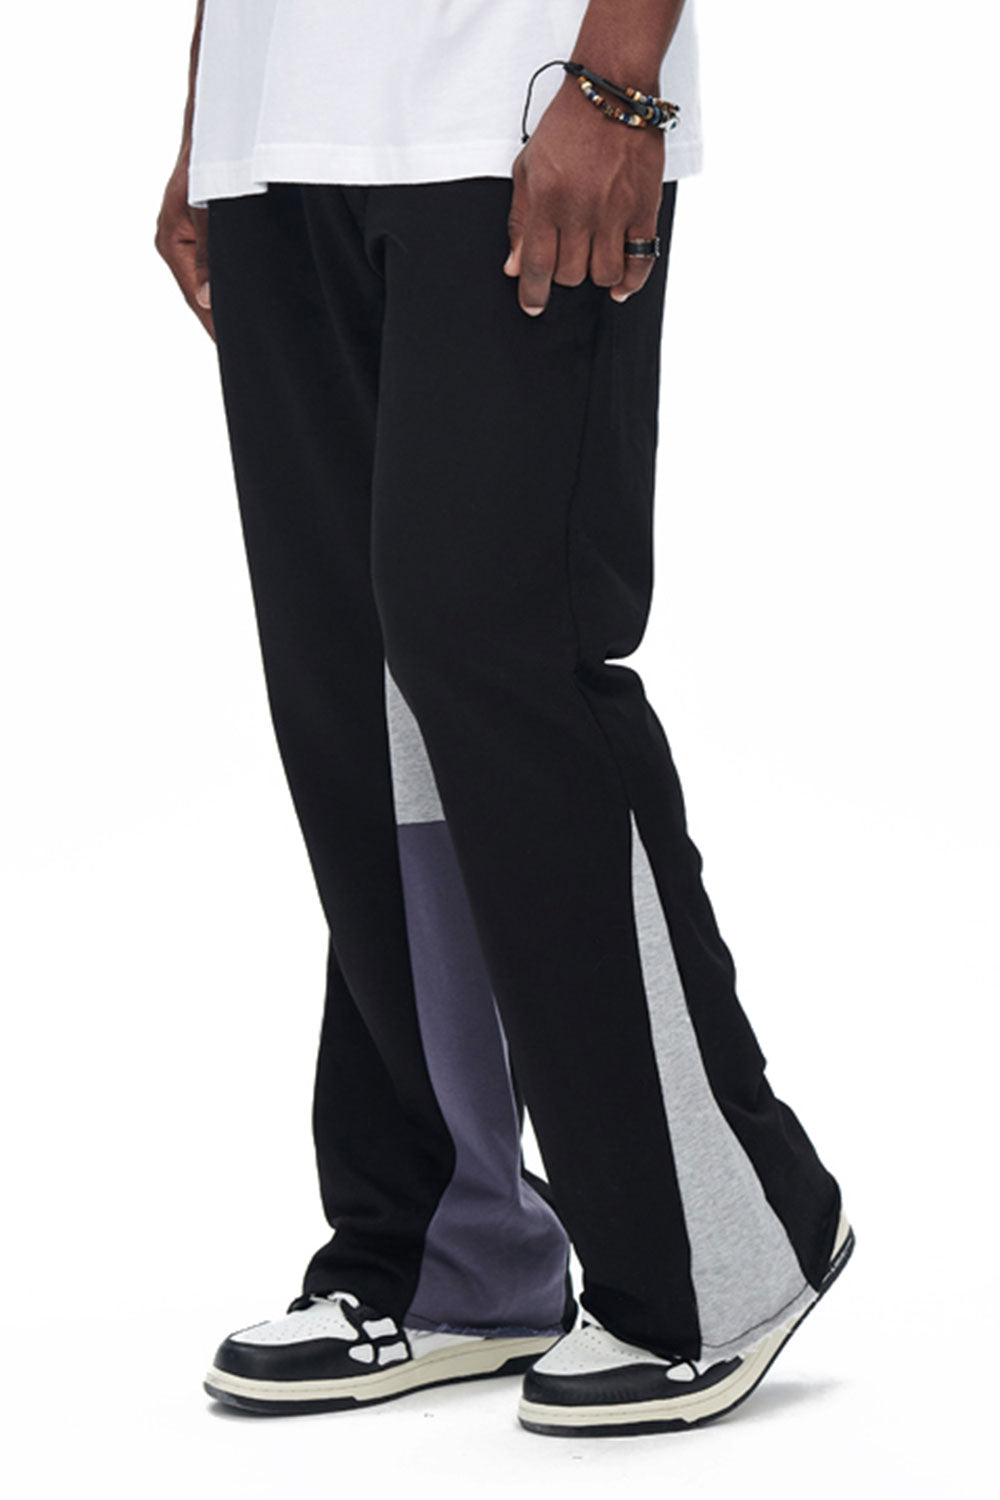 Contrast Bootcut Sweatpant Black For Sale – GINGTTO